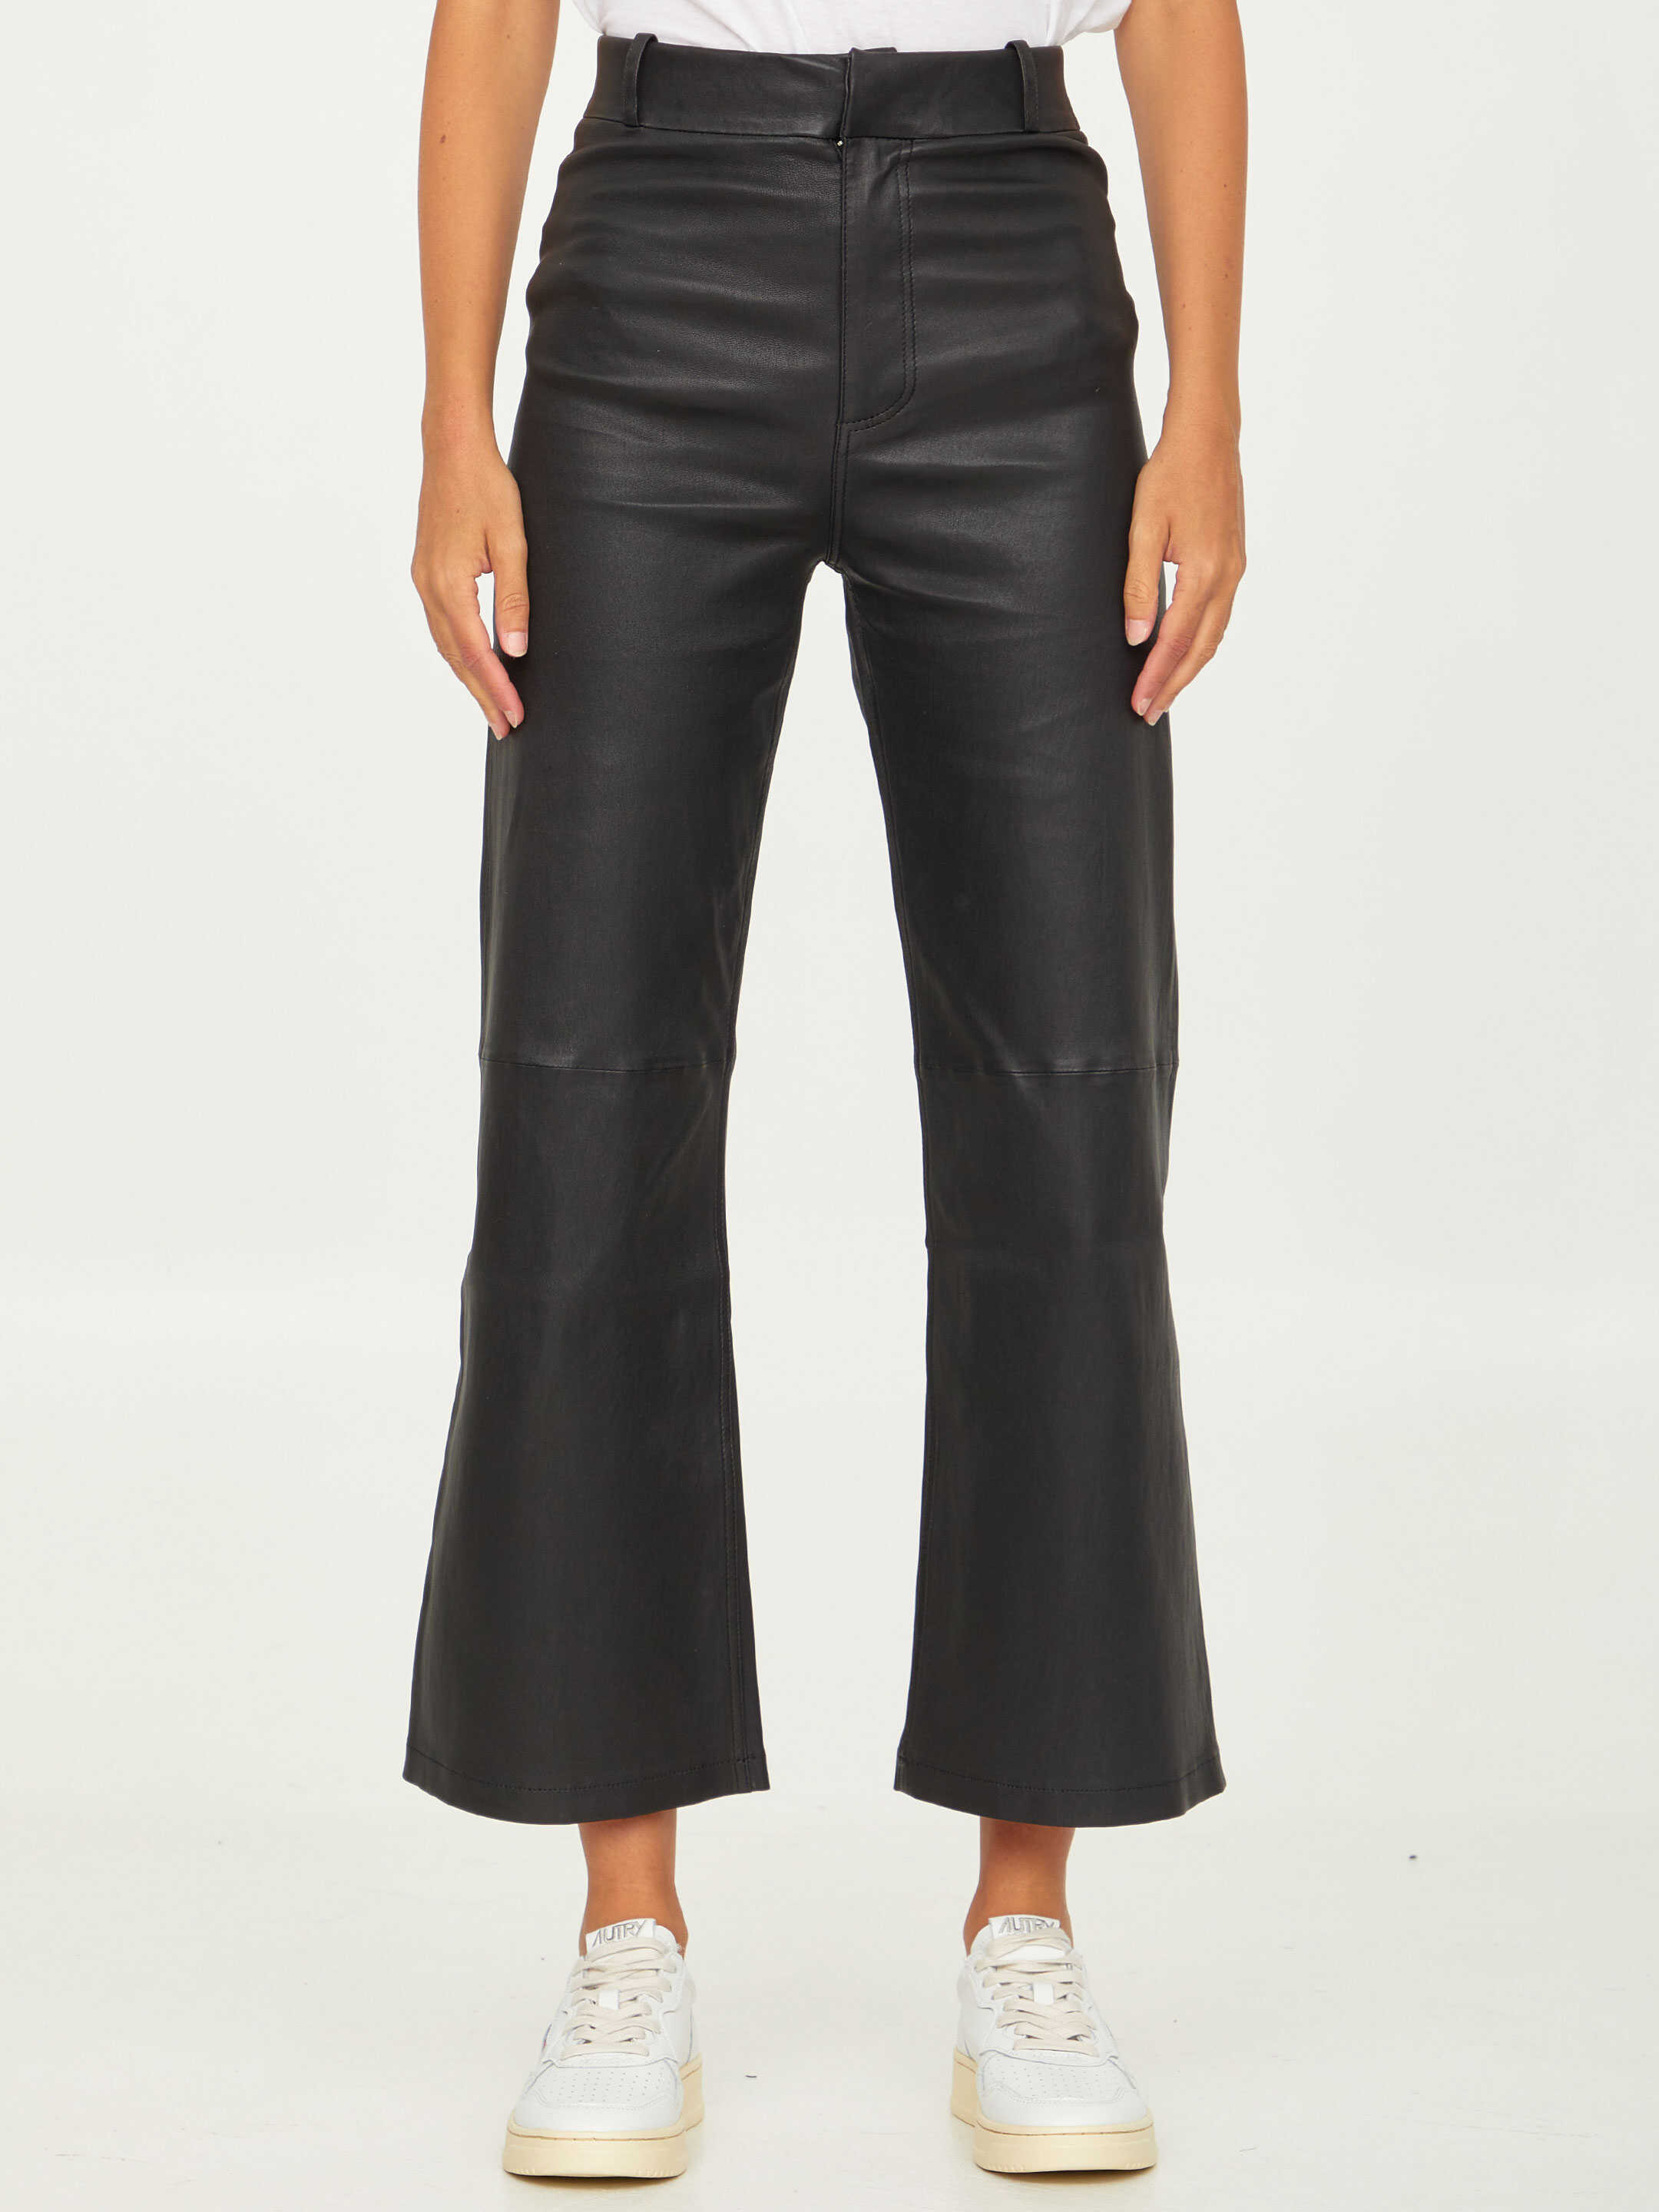 ARMA Leather Trousers Black image12